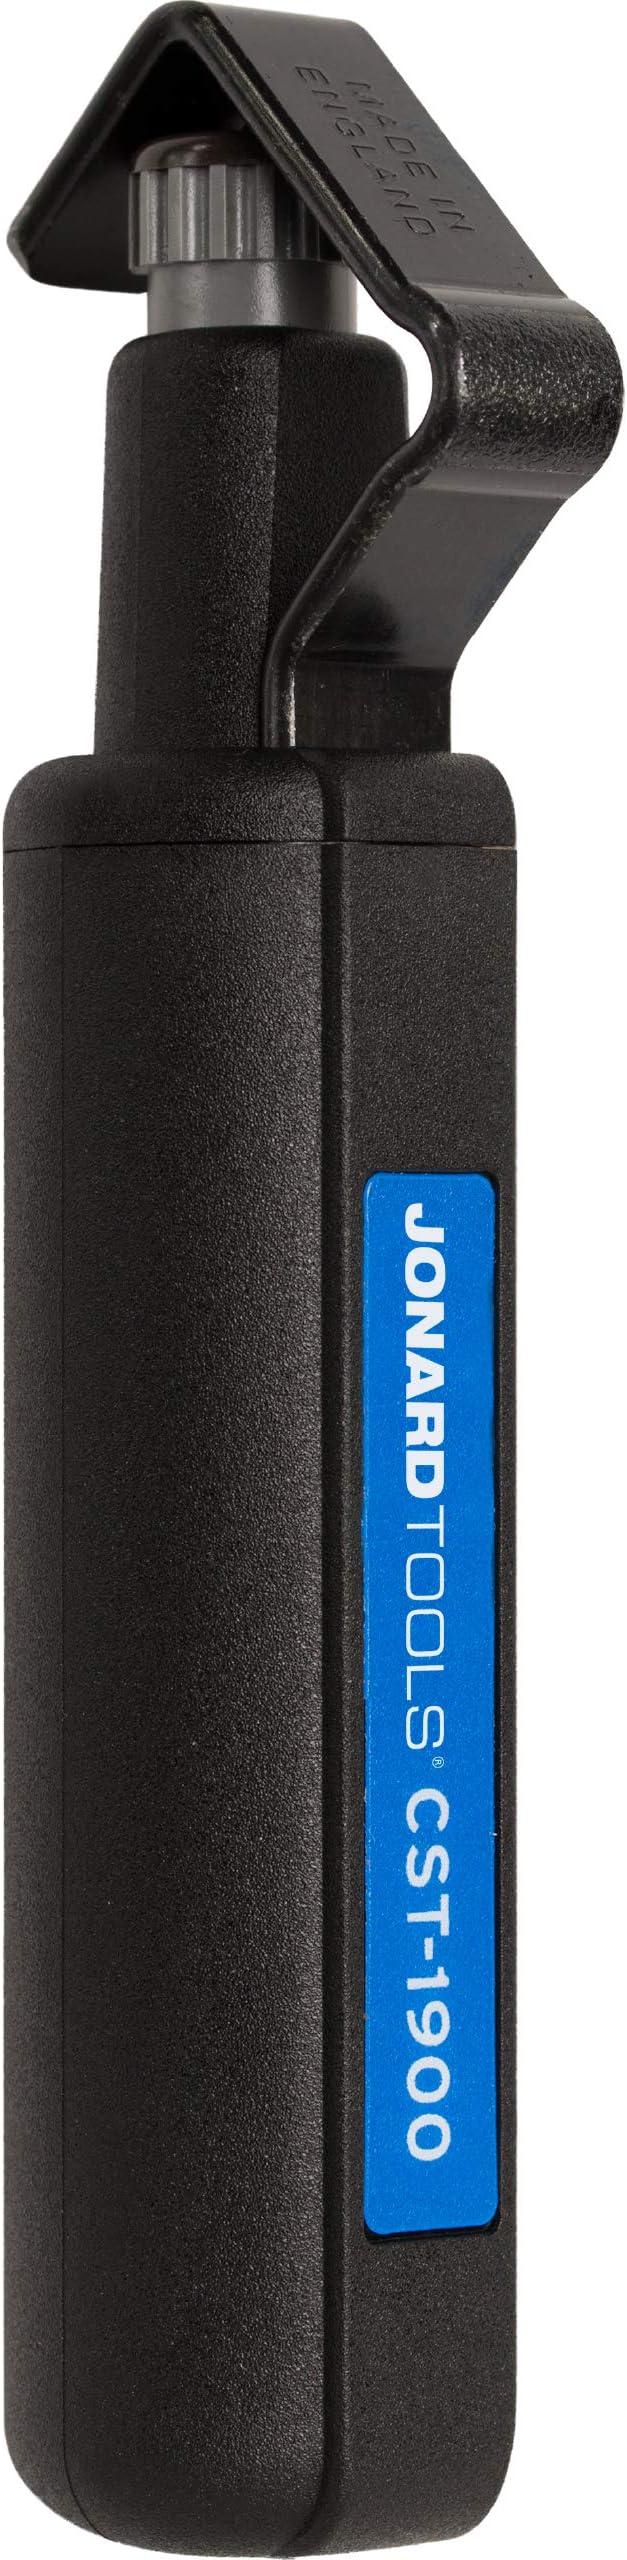 Jonard Tools CST-1900 Round Cable Stripper for Fast and Precise Jacket Removal, 3/16" to 1 1/8" Diameter